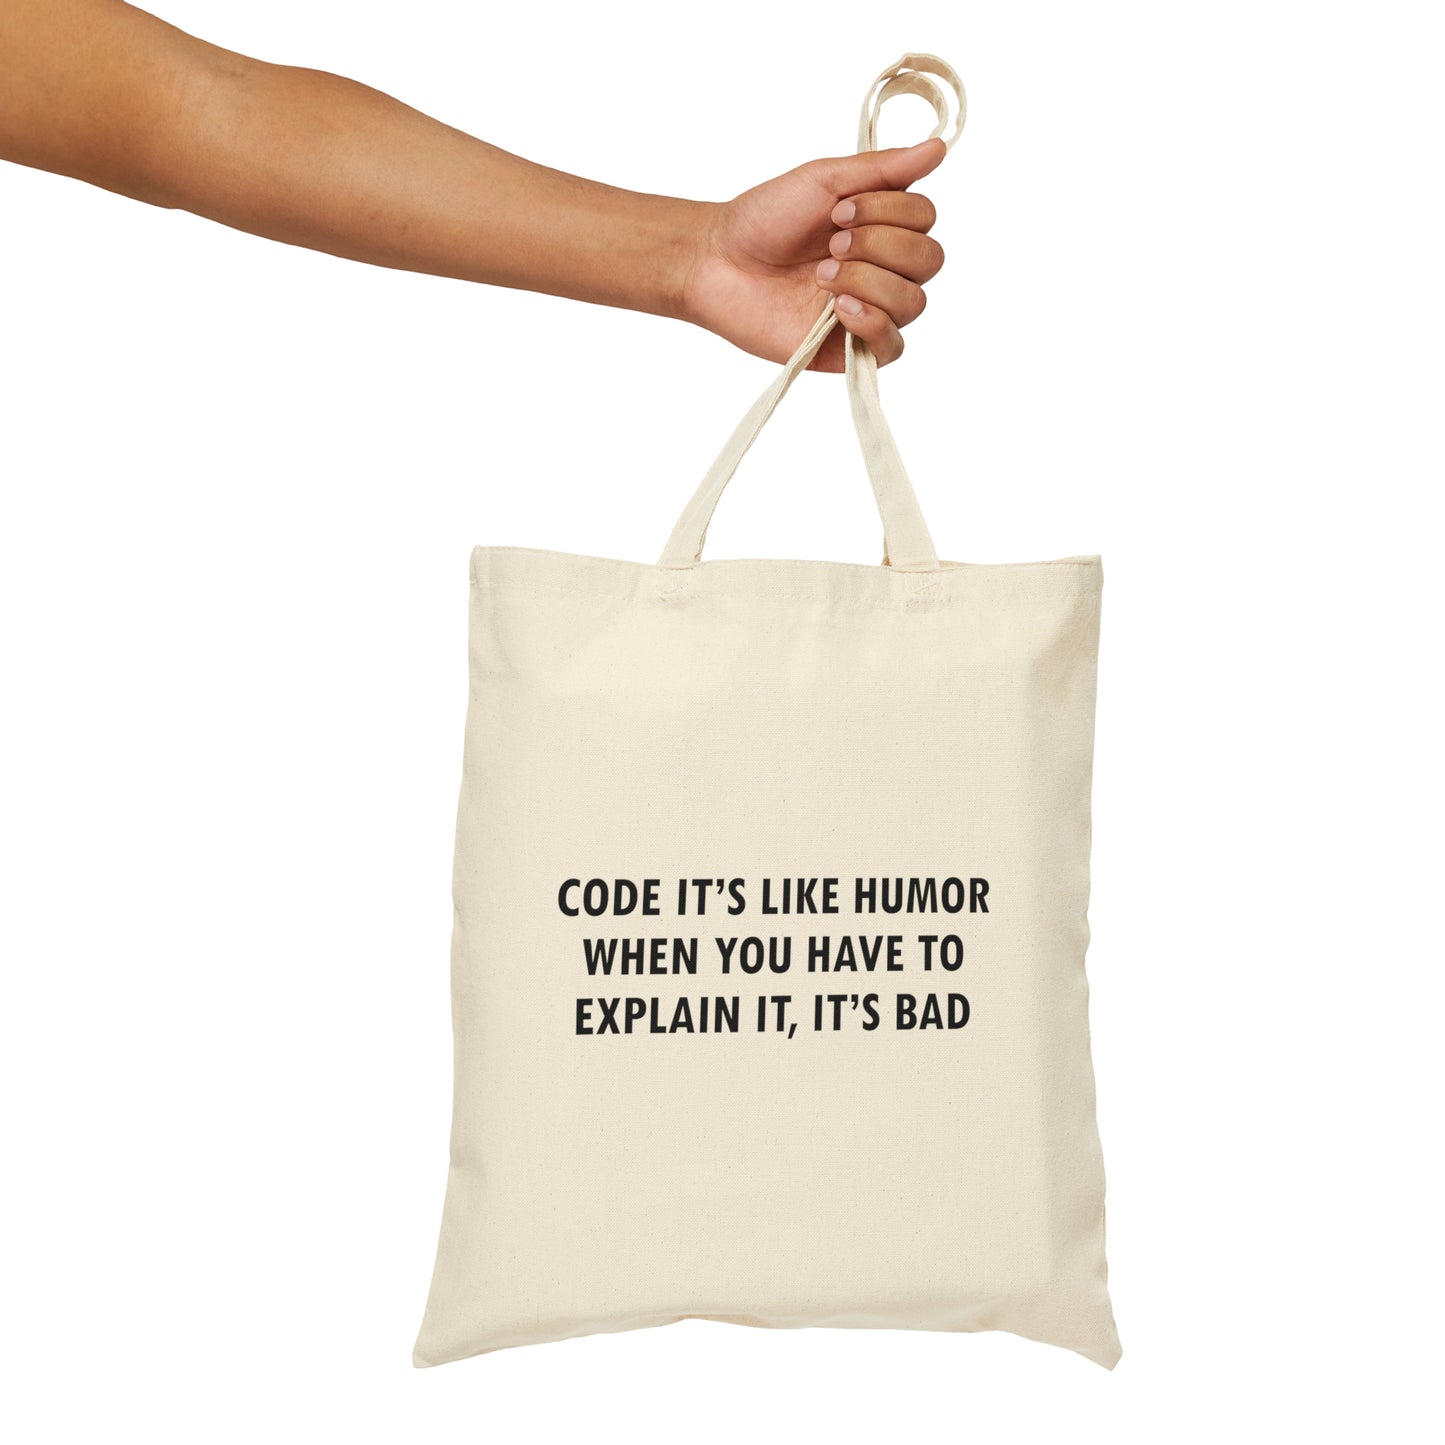 Humor Programming IT for Computer Security Hackers Canvas Shopping Cotton Tote Bag